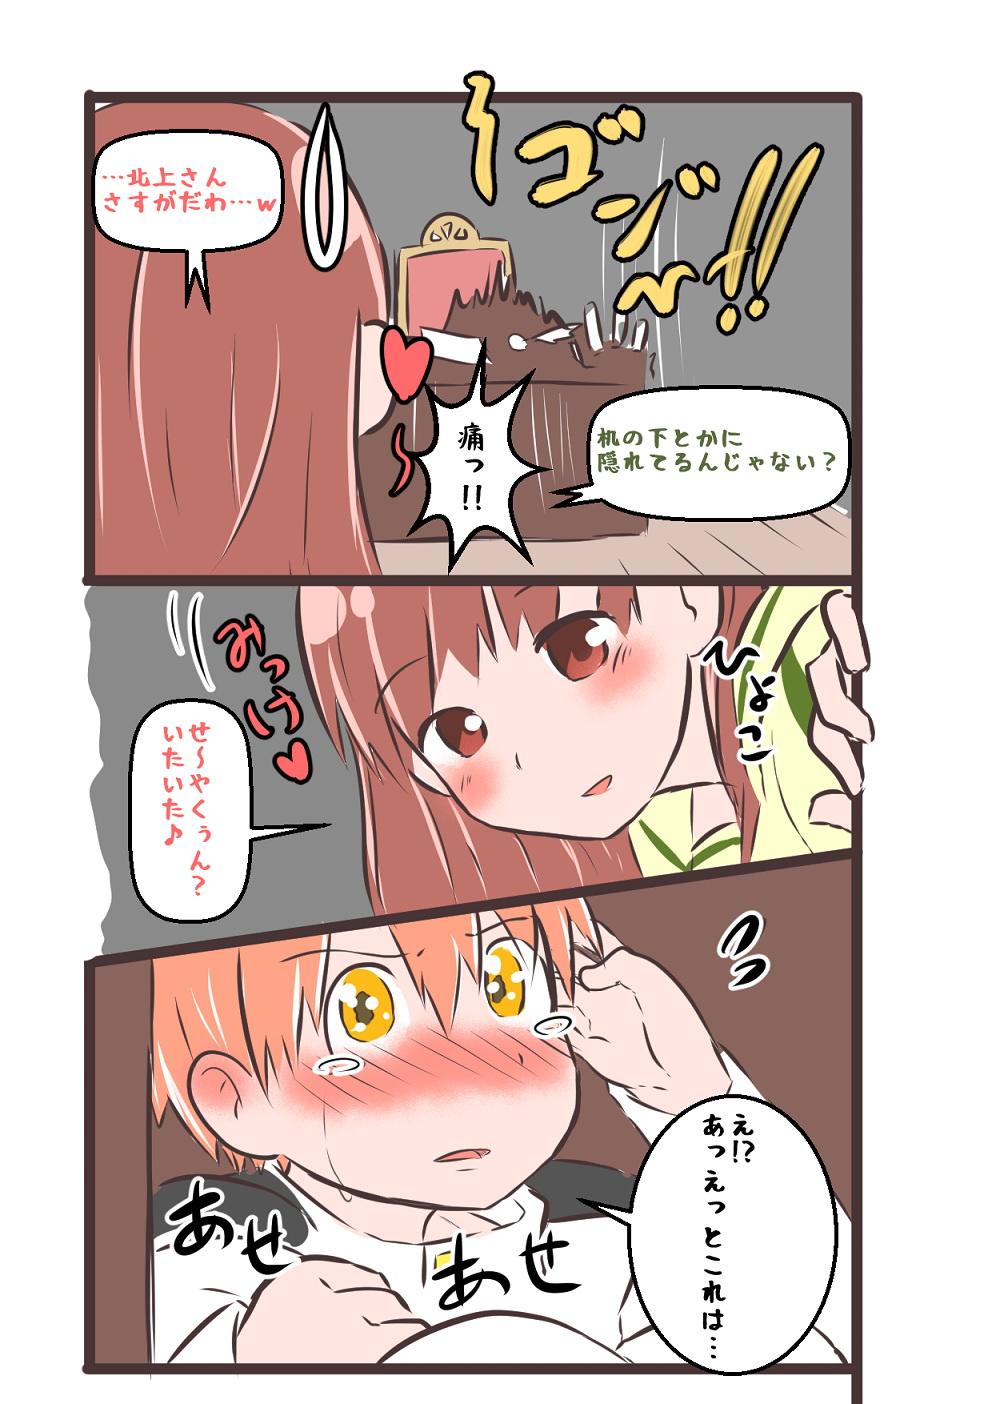 Bucetinha すき★きみ★きす - Kantai collection Lesbians - Page 6